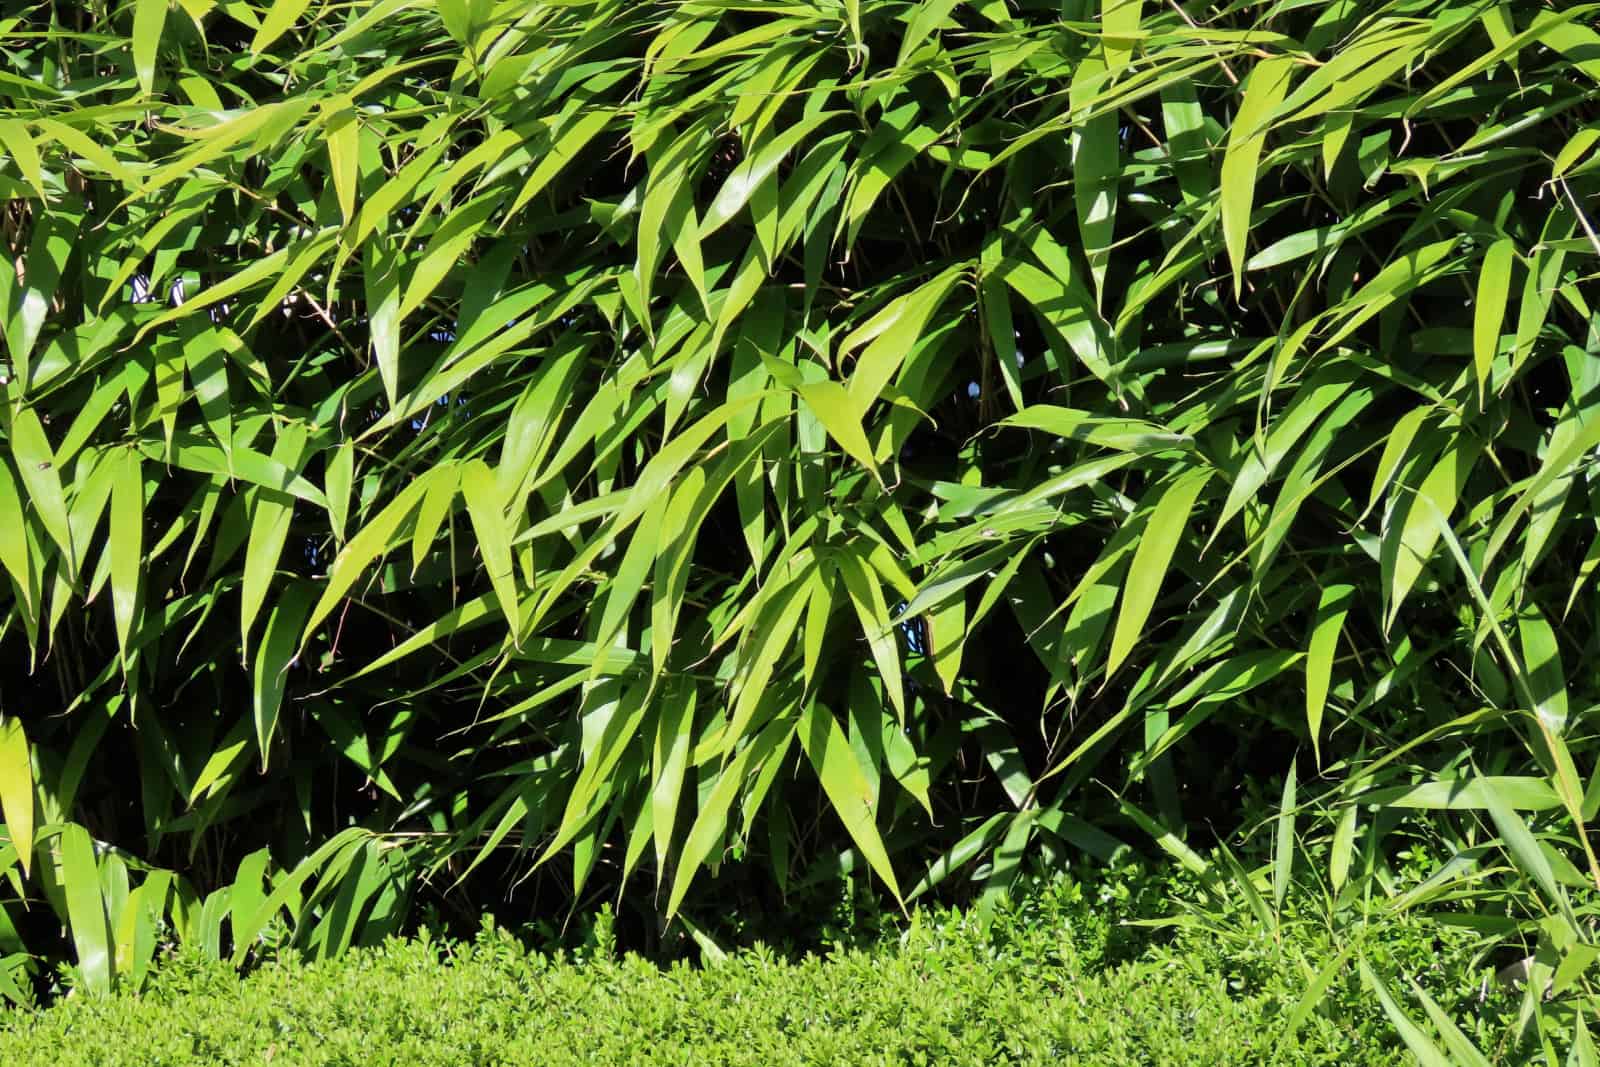 Green bamboo plants forming an even and thick hedge